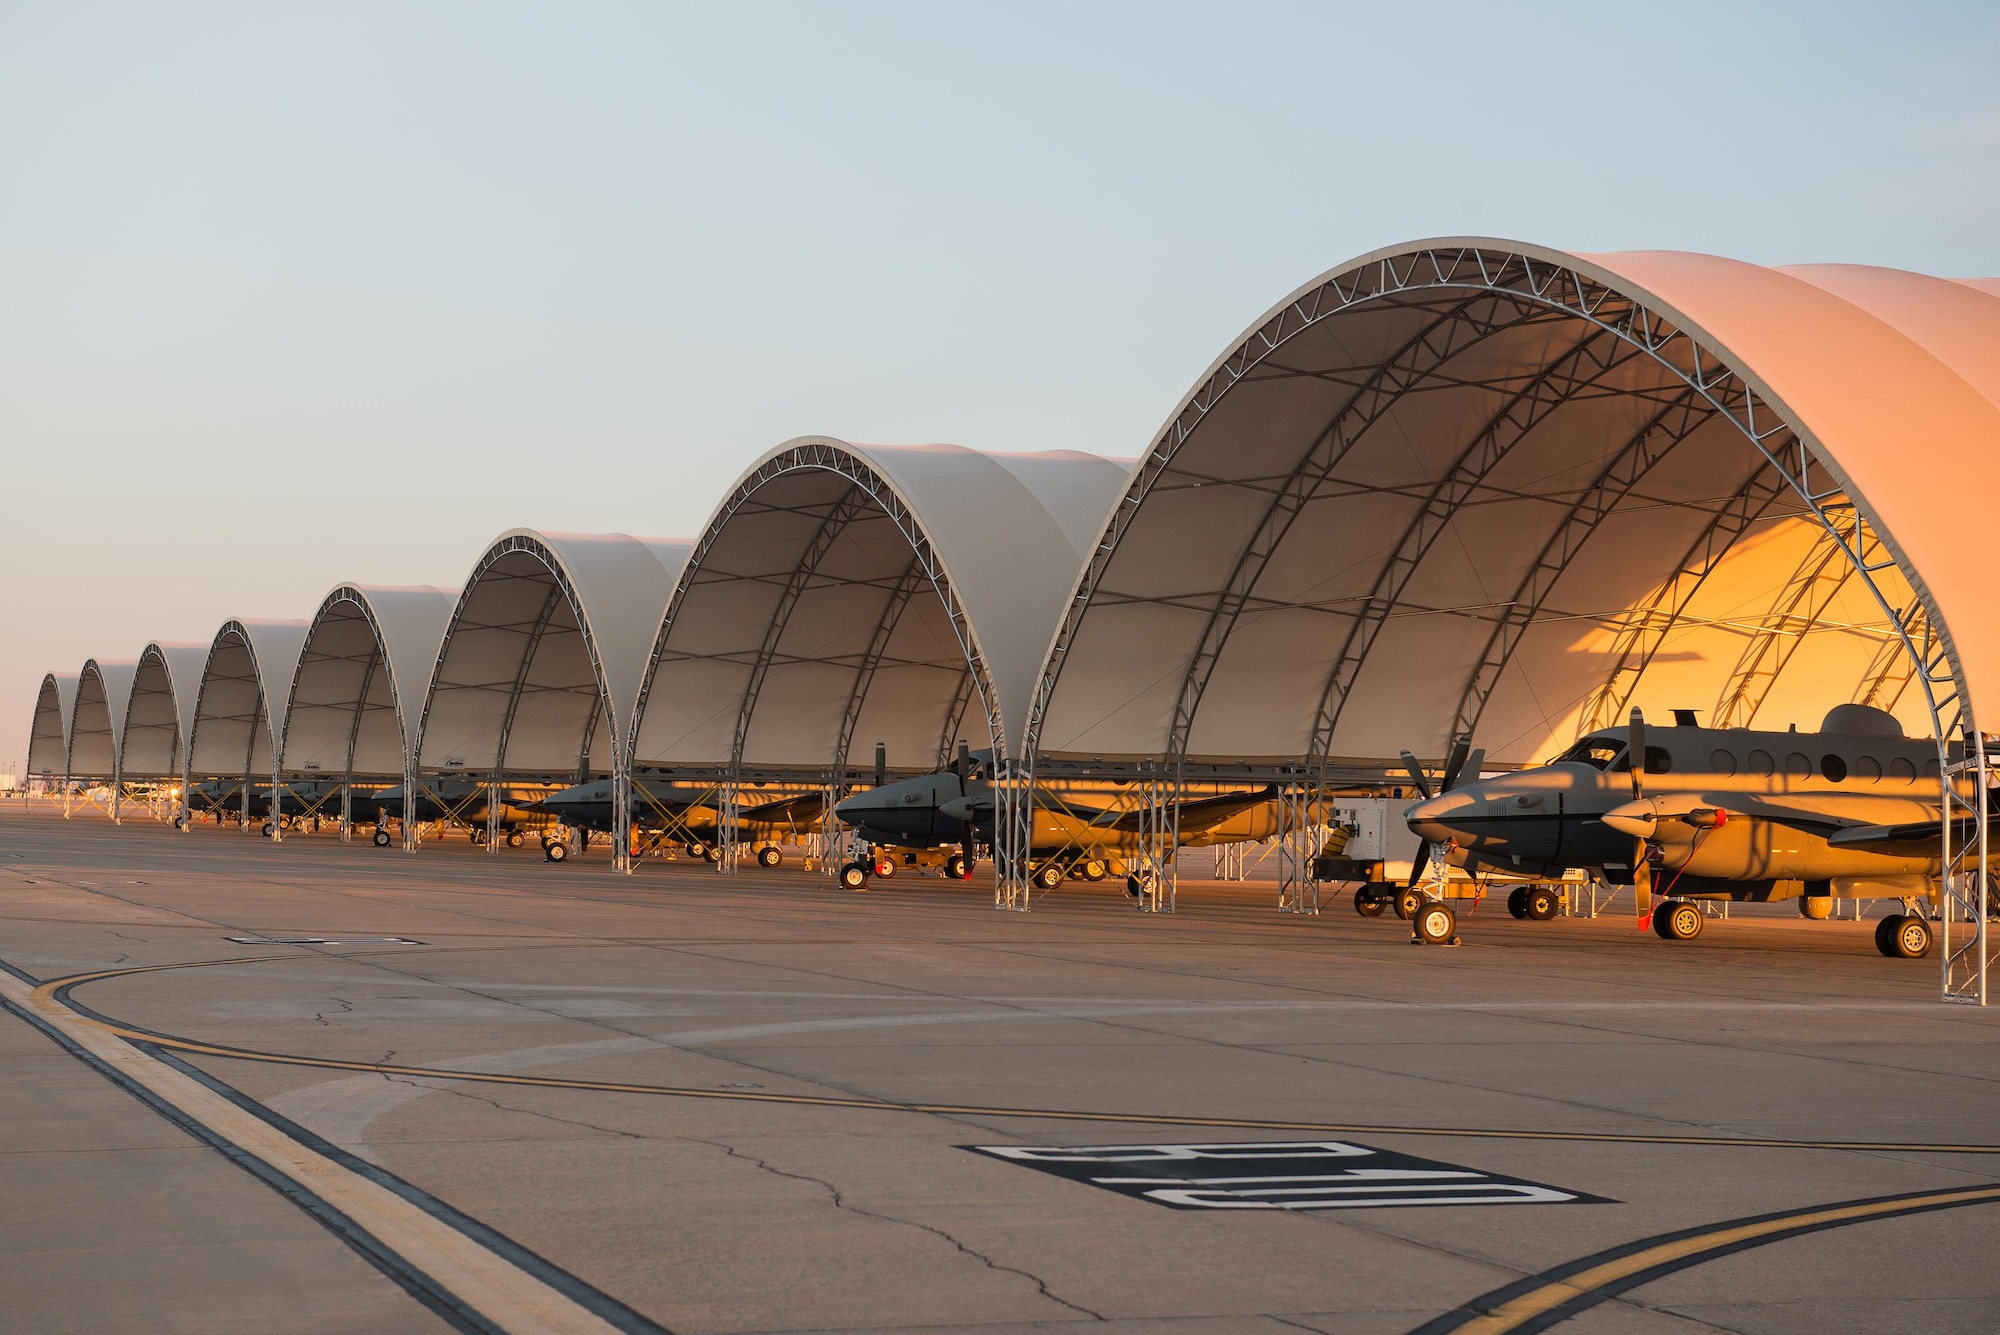 MC-12W's from the 137th Special Operations Wing, Oklahoma City, are parked under eight new aircraft shelters for the Will Rogers Air National Guard Base flight line, January 31, 2016. The shelters provide protection for the aircraft and the Airmen and contractors who work on them. (U.S. Air National Guard photo by Senior Master Sgt. Andrew M. LaMoreaux)